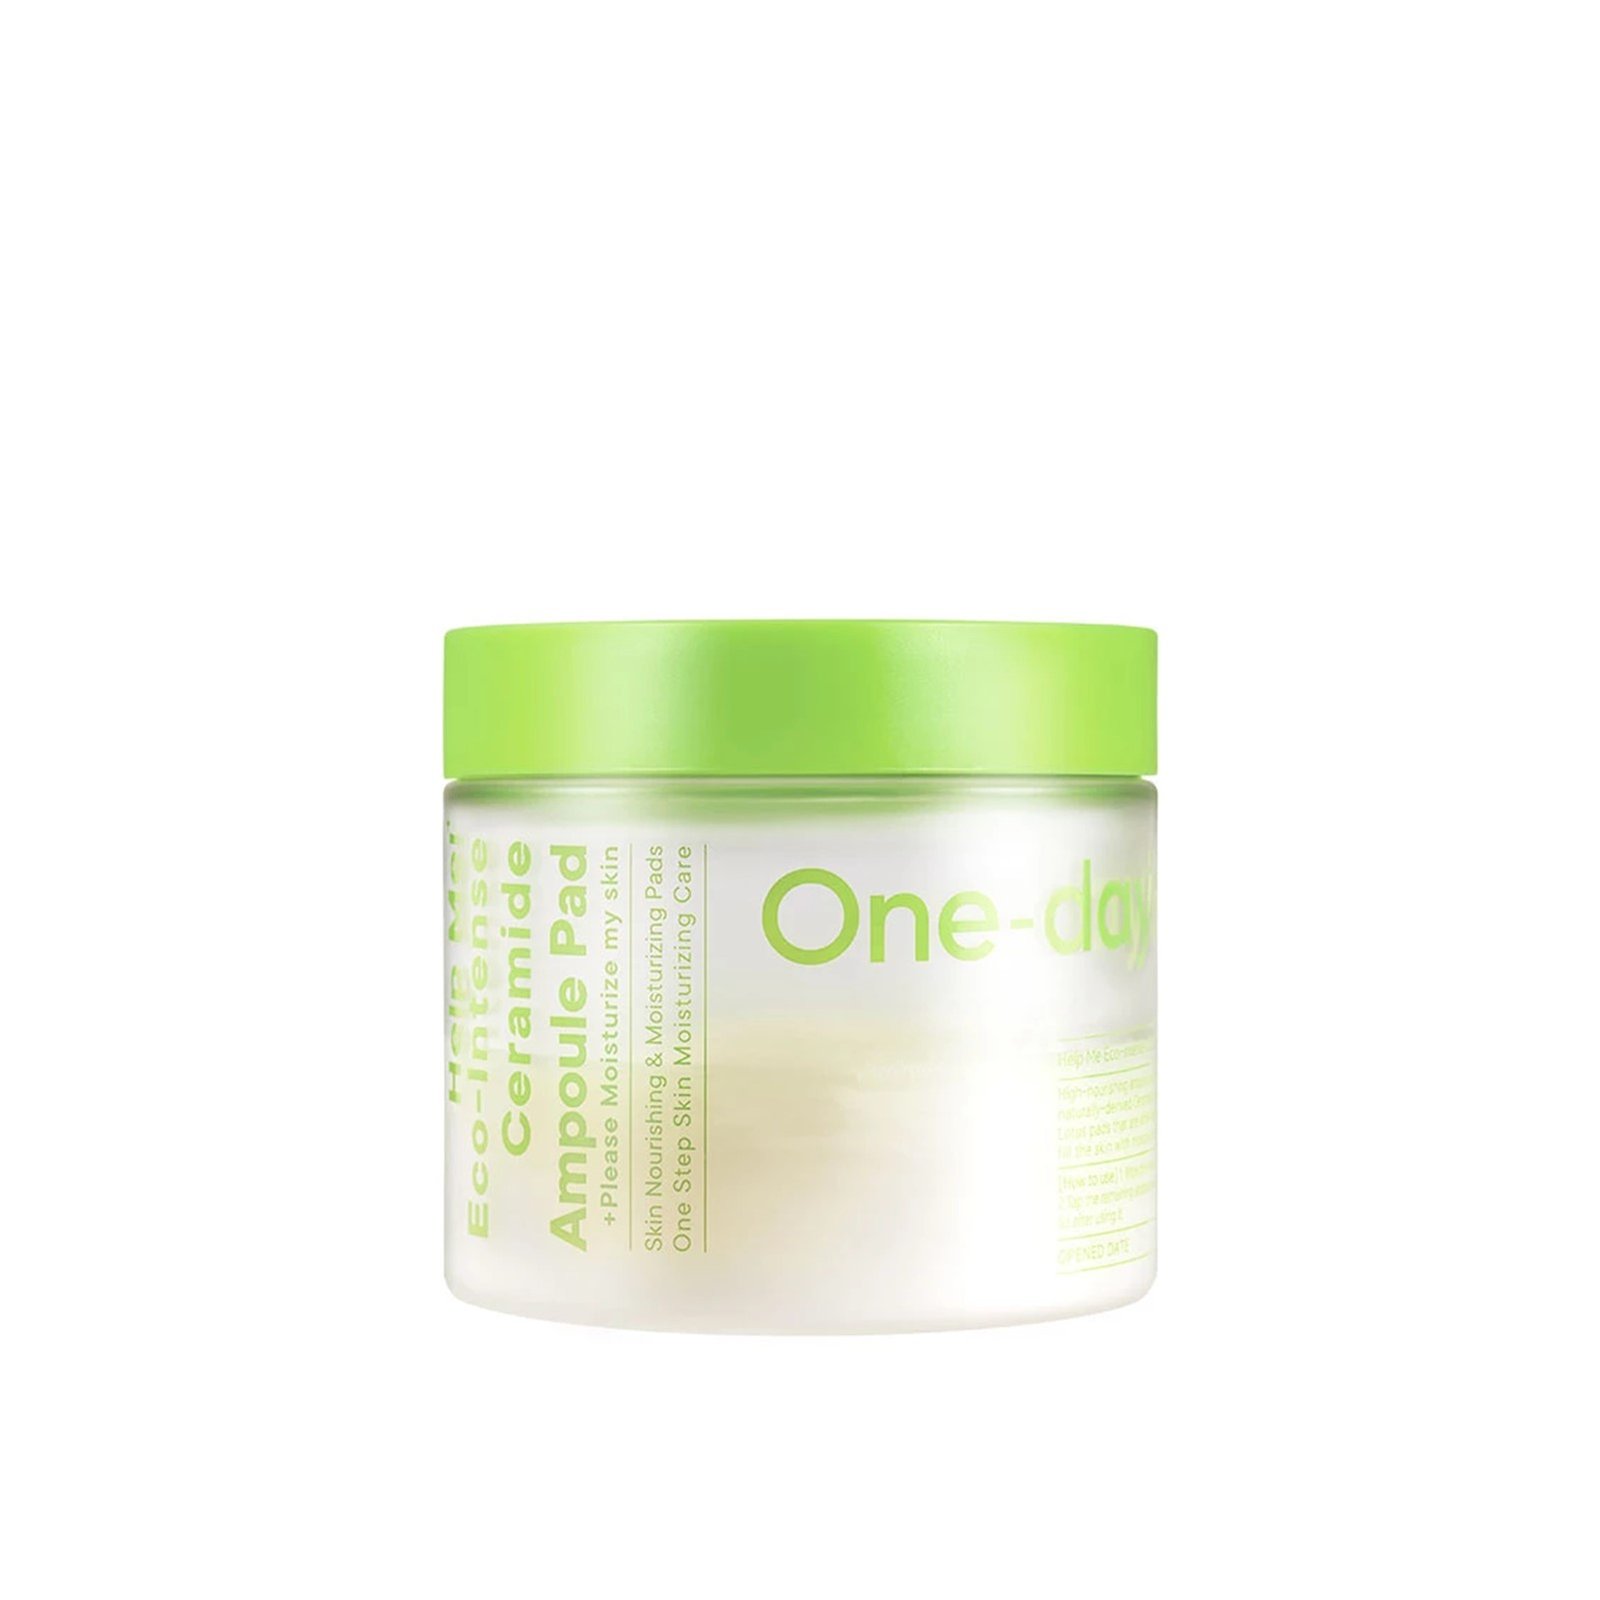 One-day's you Help Me Moisturizing Ceramide Ampoule Pad x90